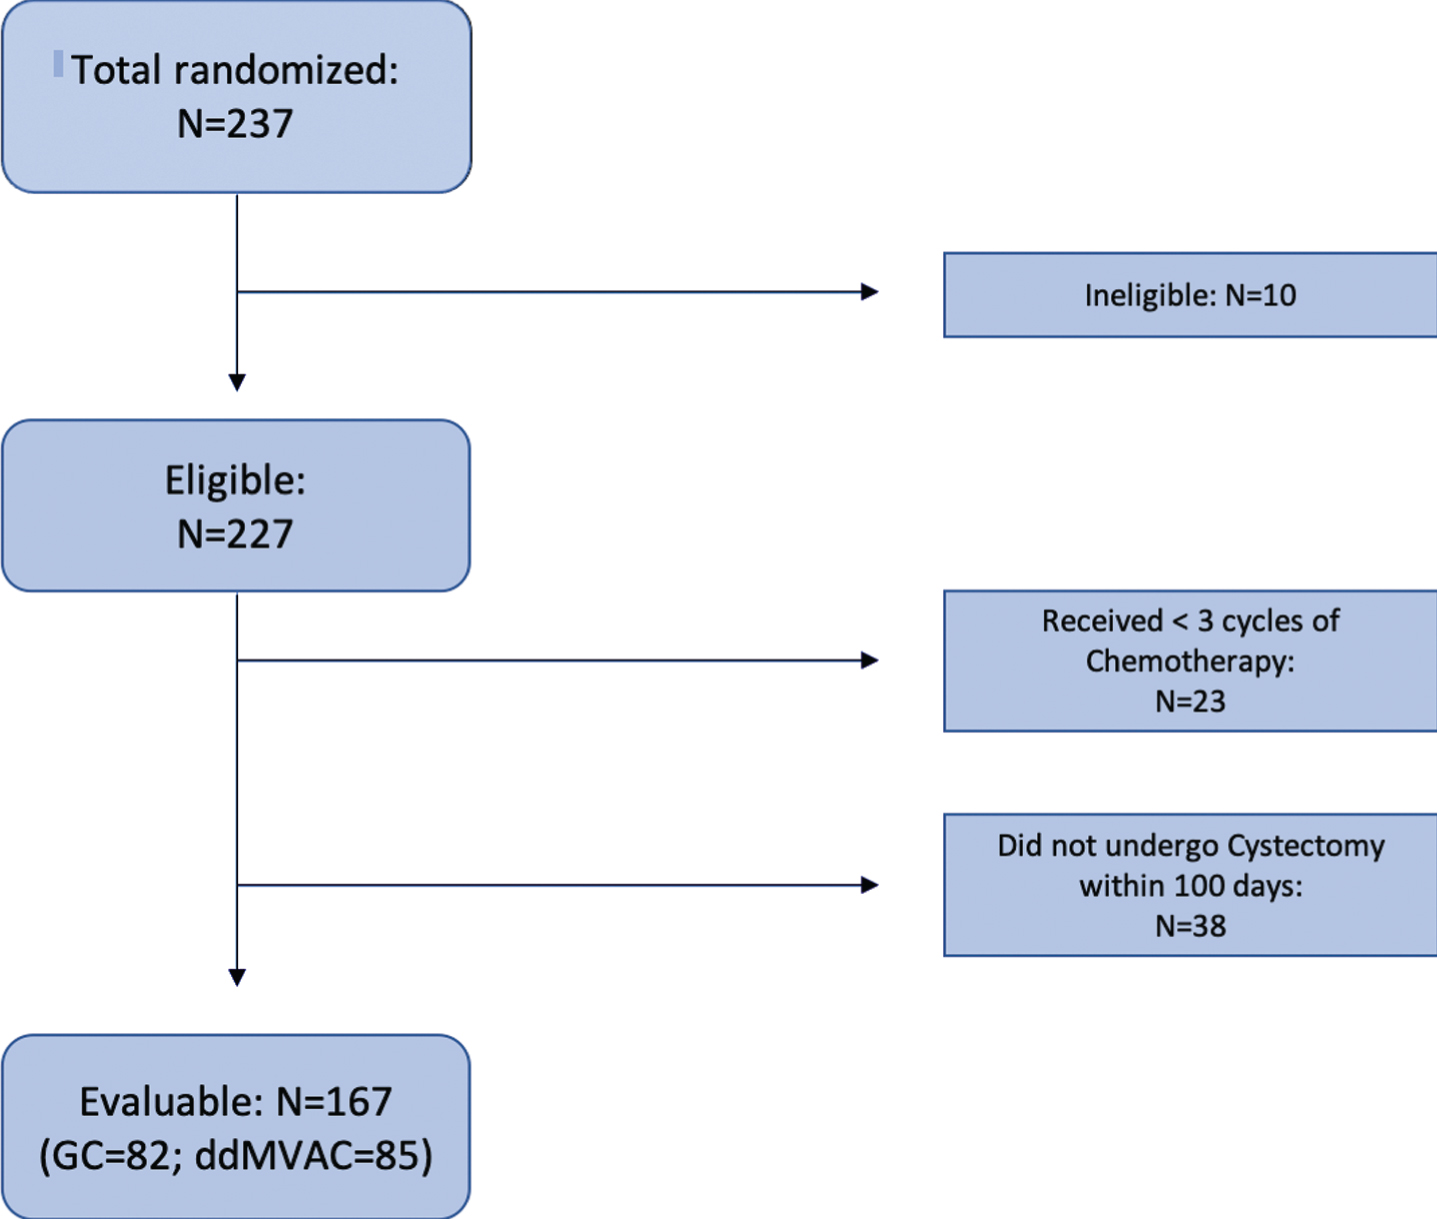 Consort Diagram. 237 Patients were included for randomization in this Phase II trial. Nine patients were found ineligible. Of eligible patients, exclusions left 167 evaluable randomized patients.